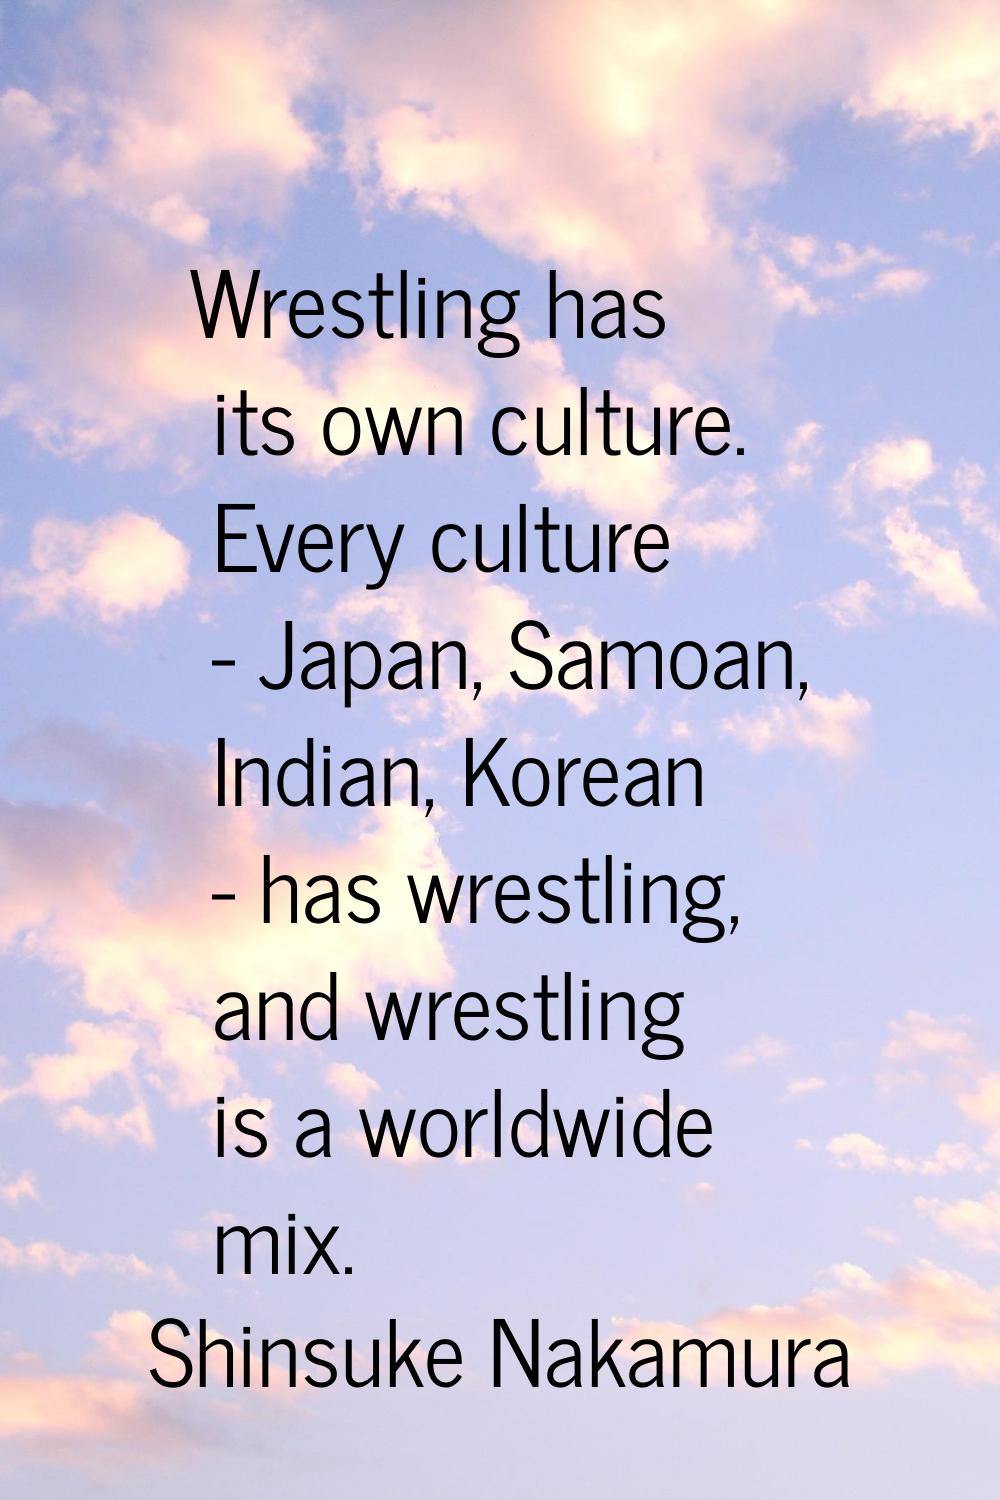 Wrestling has its own culture. Every culture - Japan, Samoan, Indian, Korean - has wrestling, and w